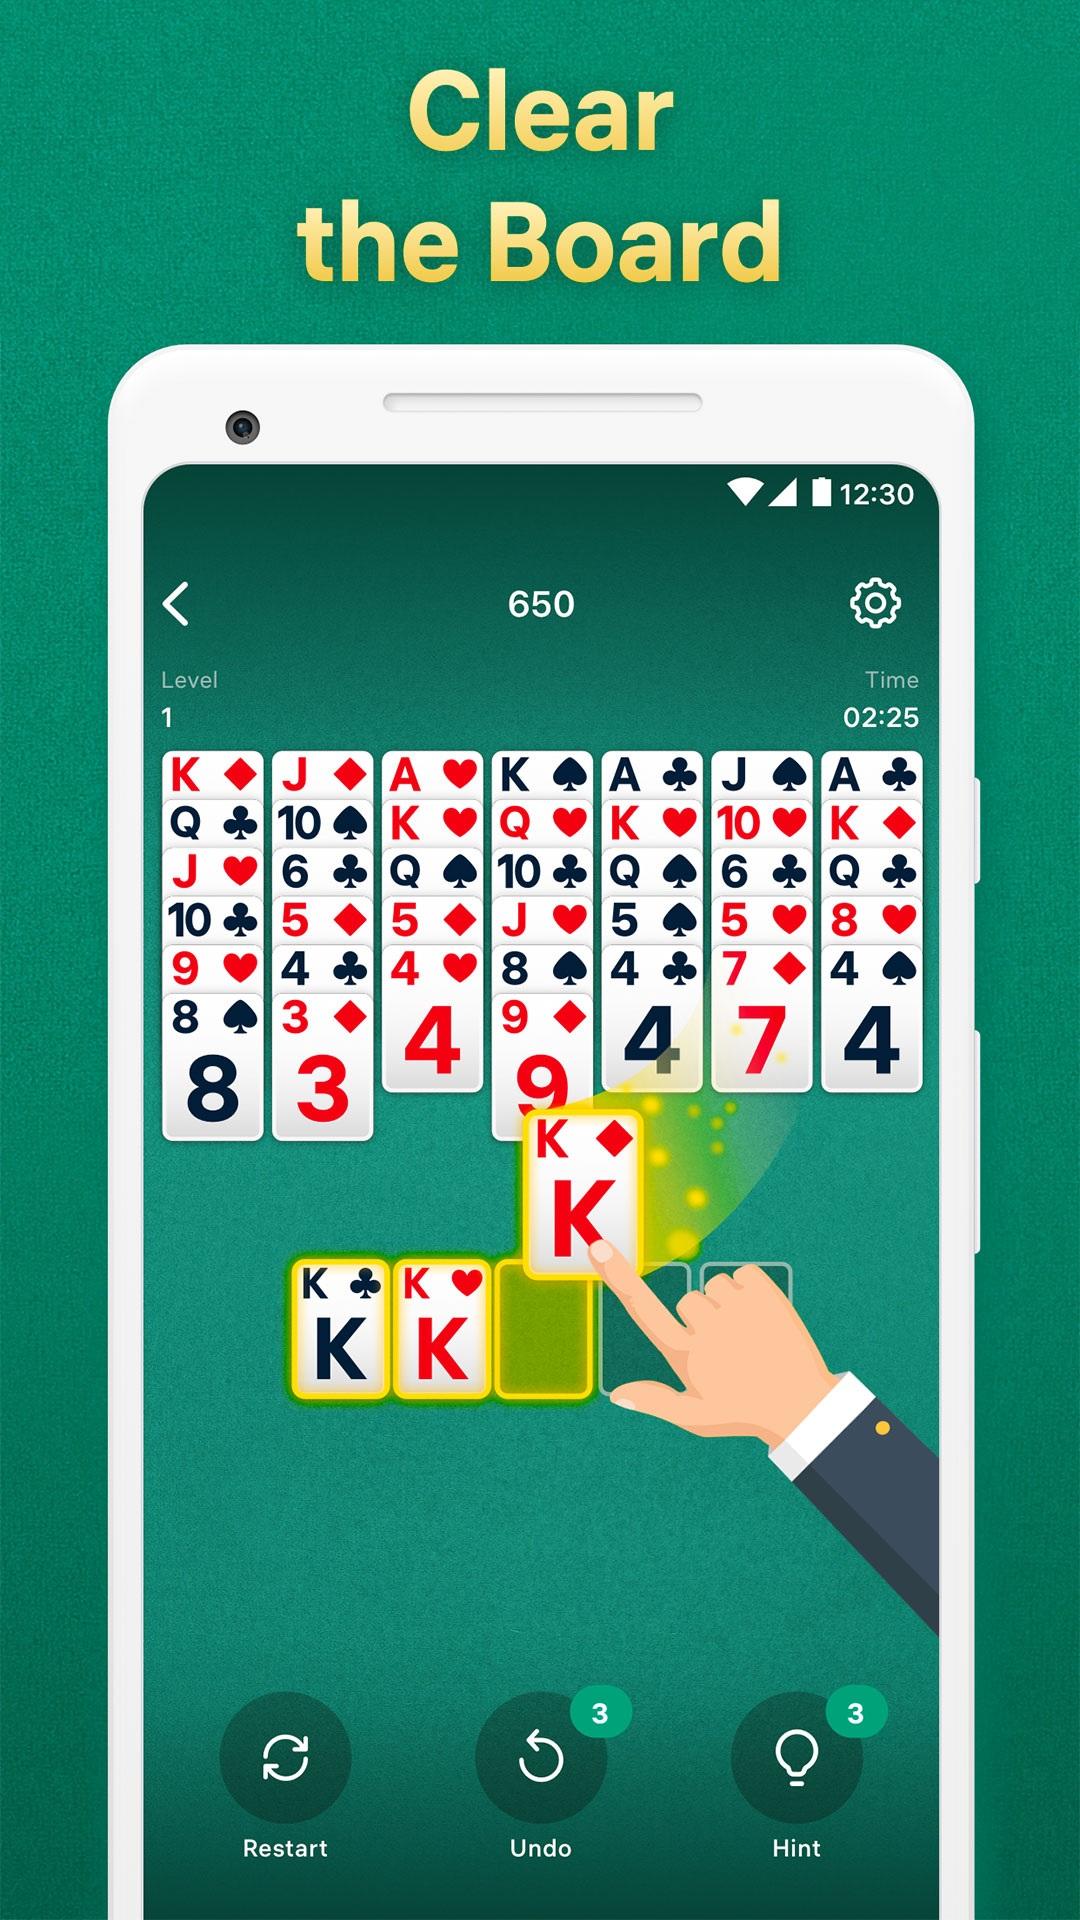 Freecell Solitaire - Green Felt  Solitaire, Solitaire games, Games to play